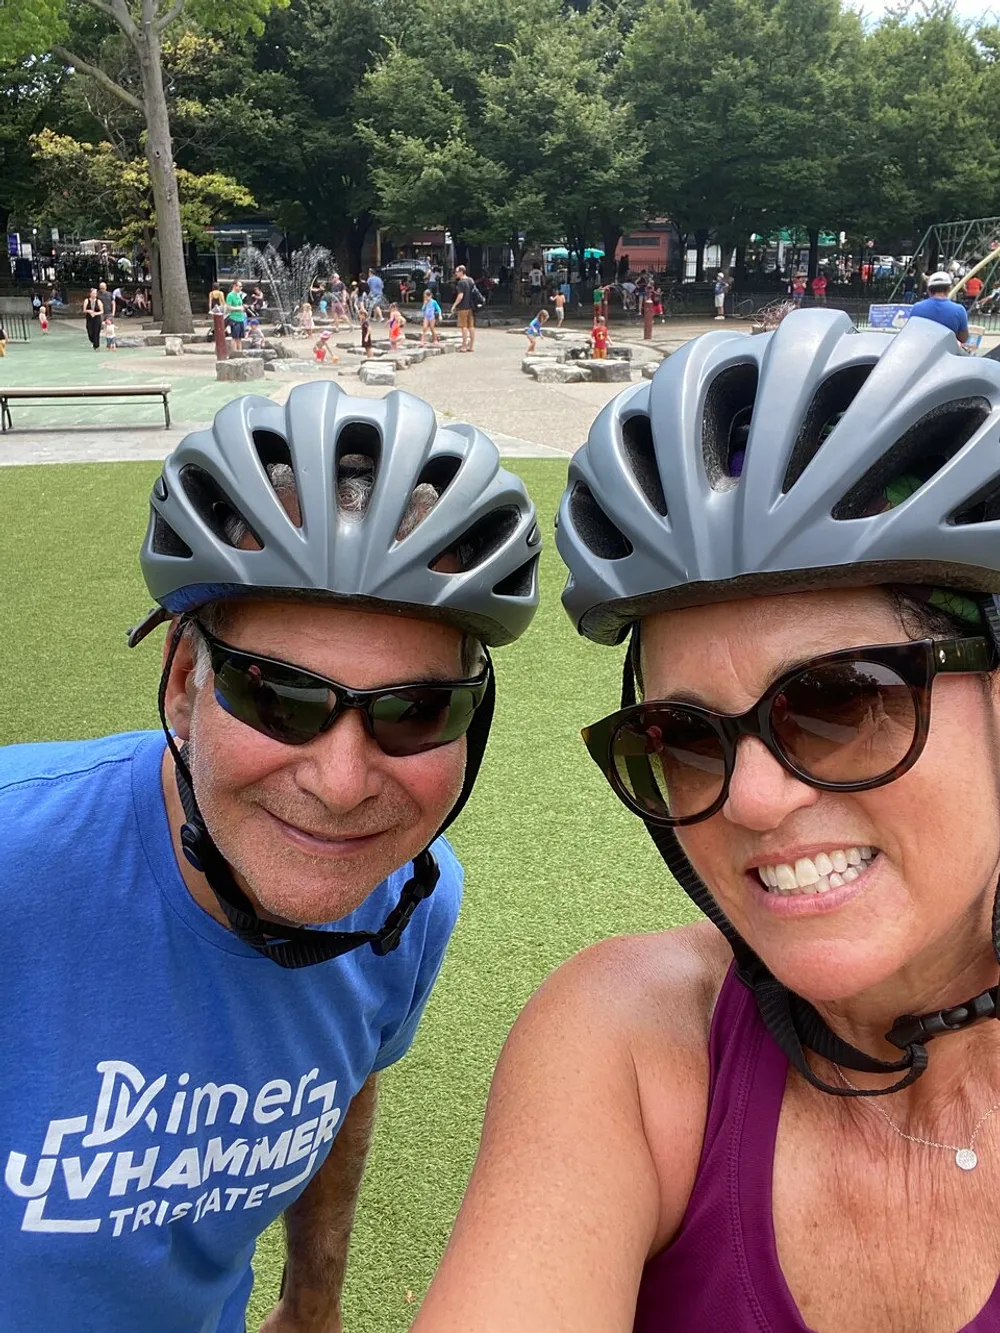 Two people wearing bicycle helmets are taking a selfie together with a background of an outdoor area where children are playing in a water feature